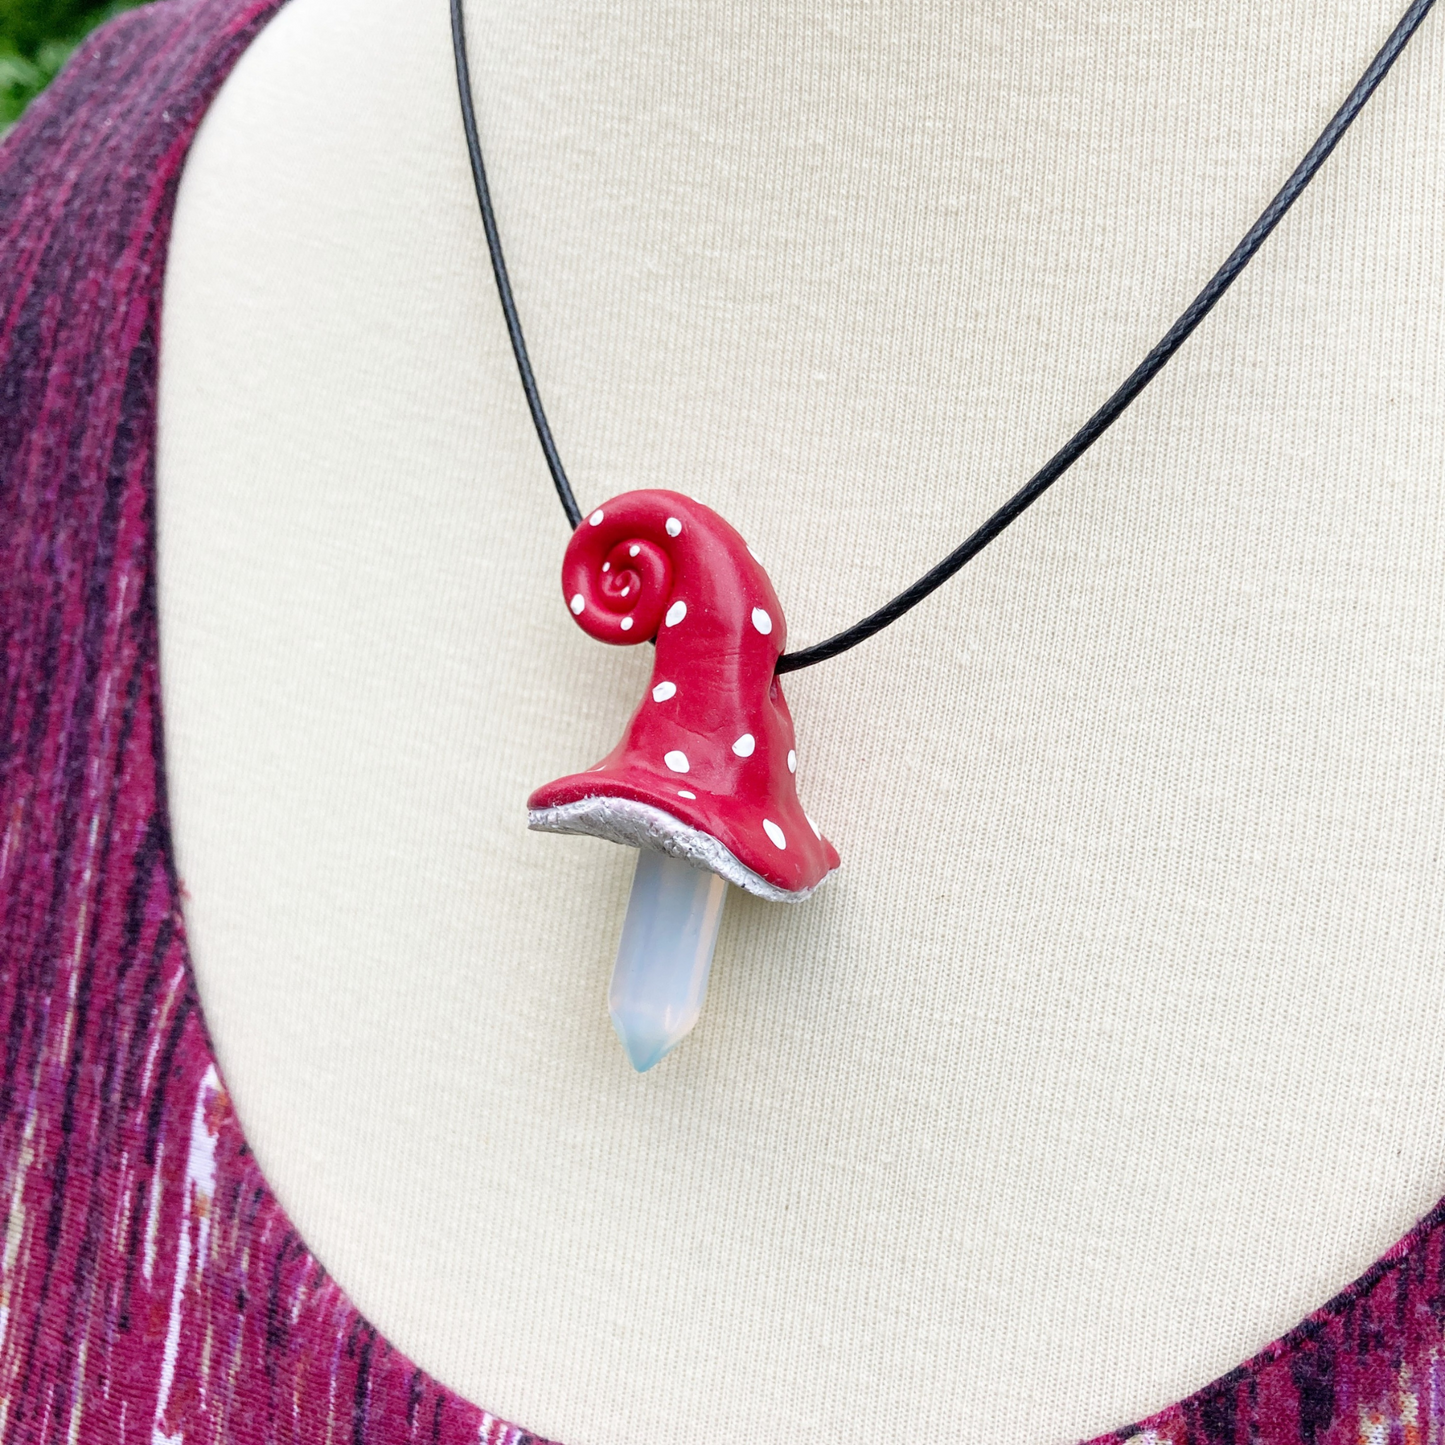 Amanita Muscaria Mushroom necklace made from polymer clay on a black cord necklace